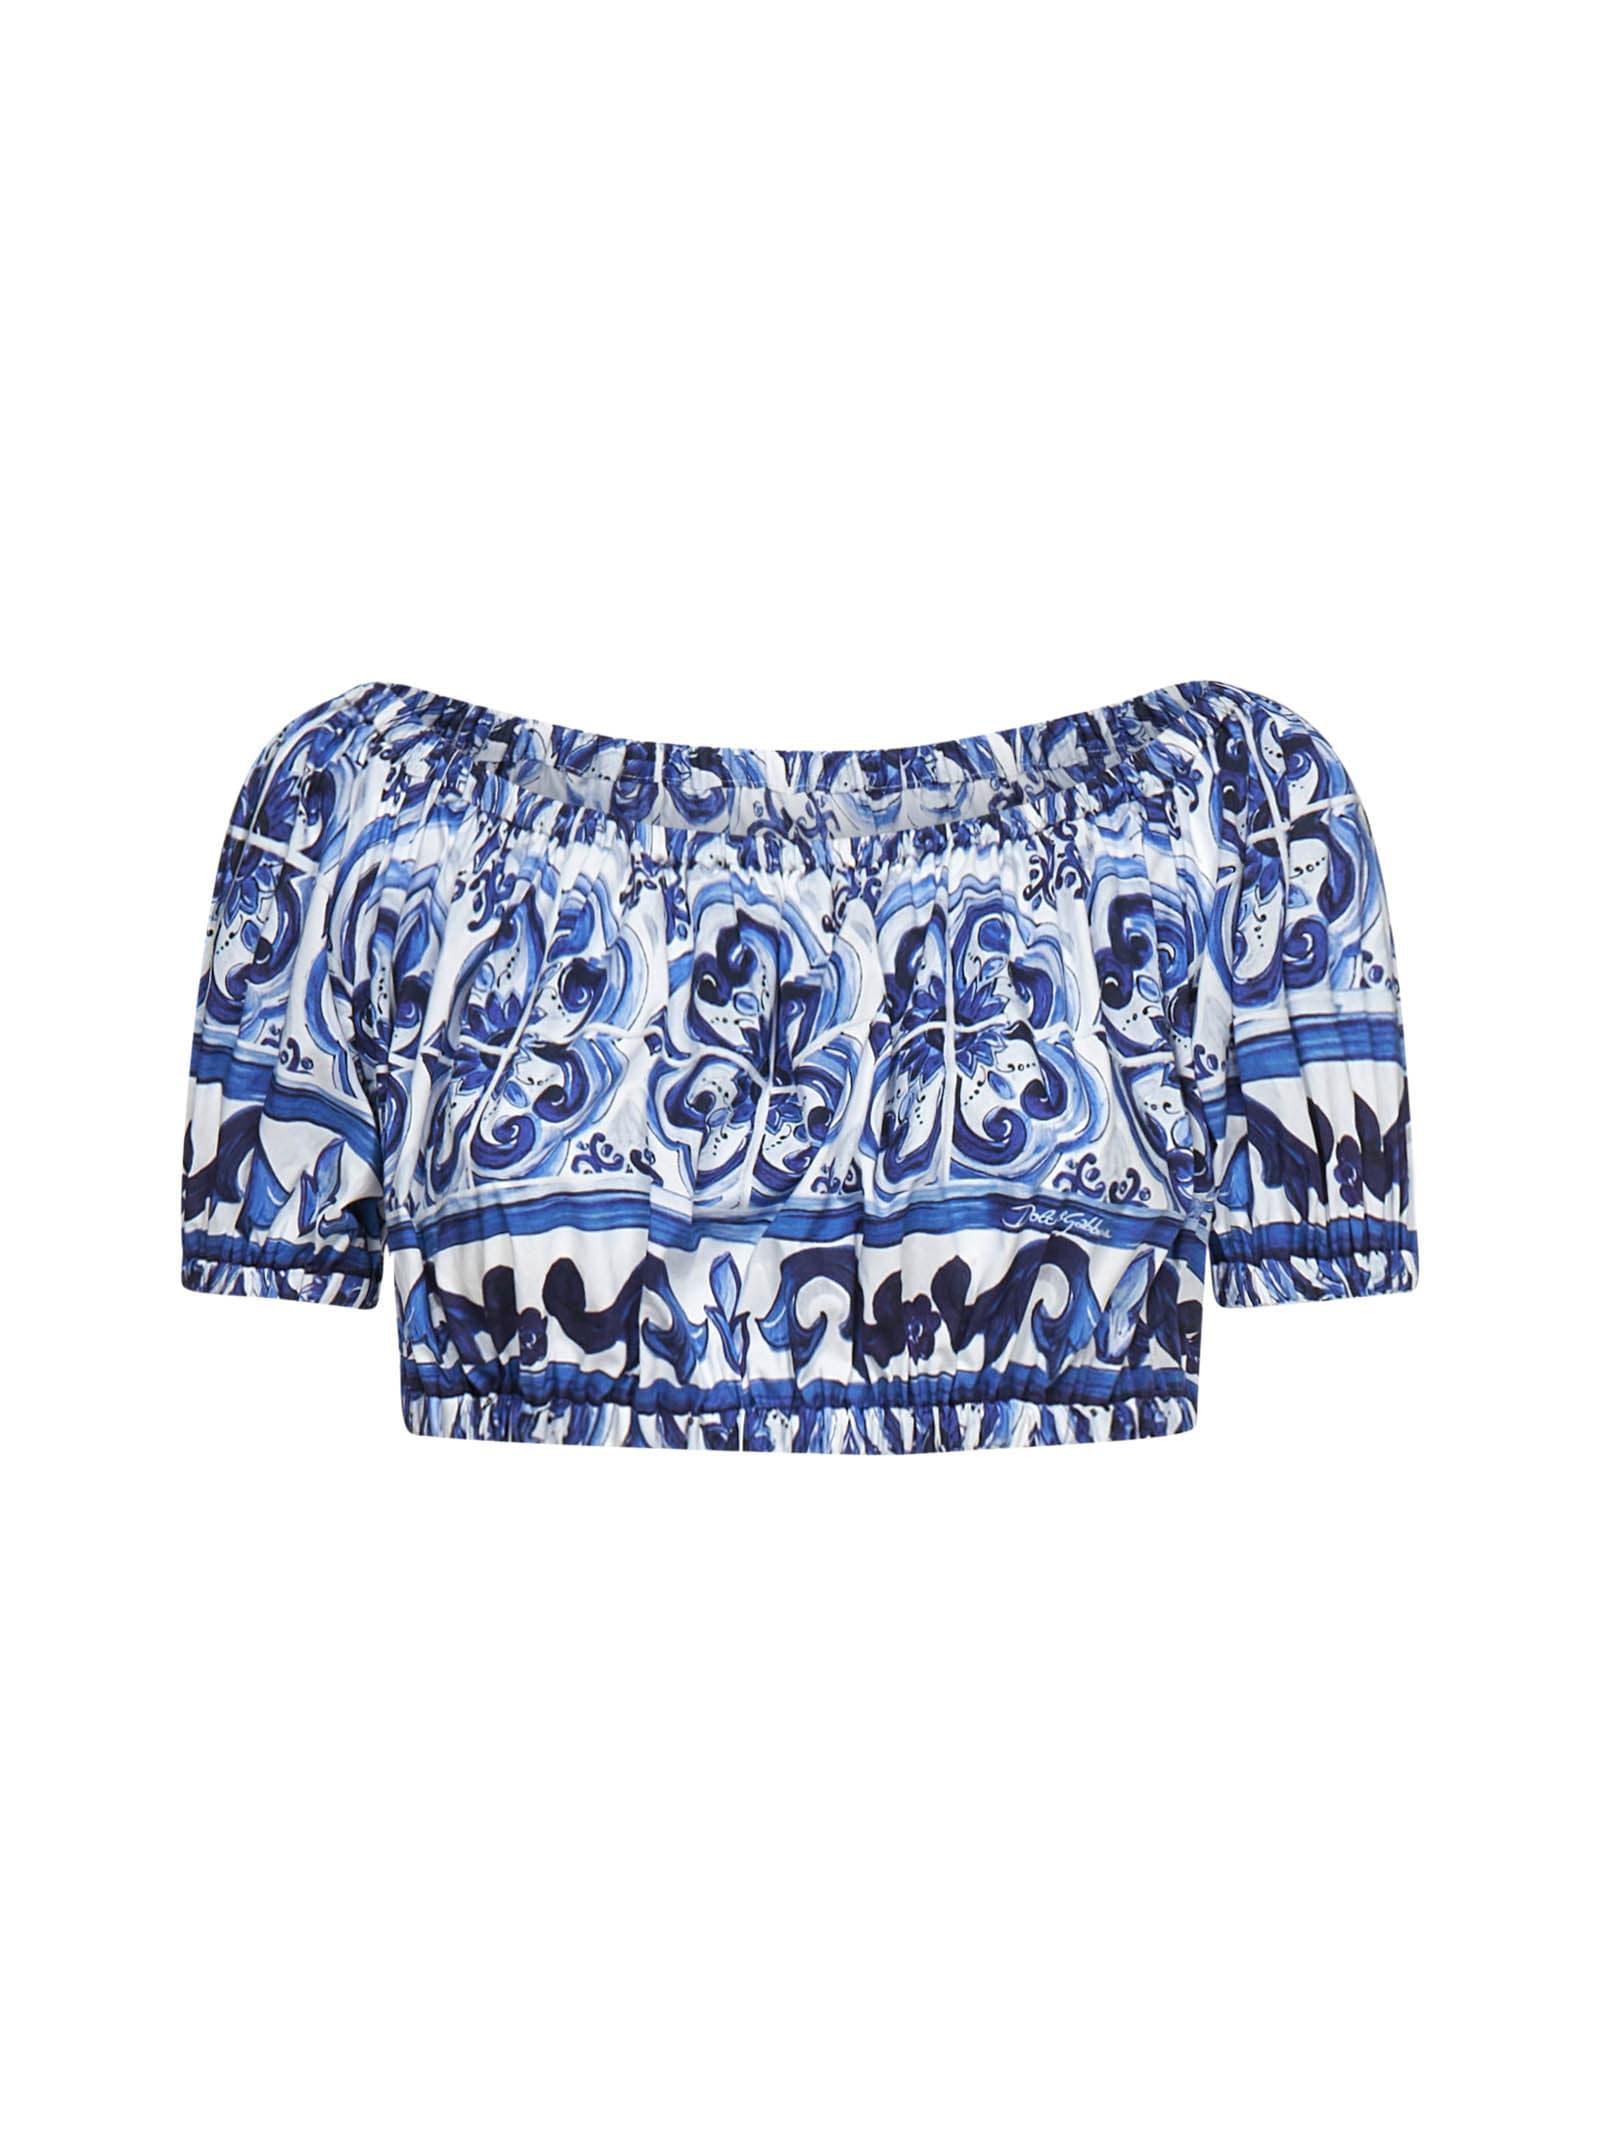 Dolce  Gabbana Majolica Print Cotton Cropped Top in Blue | Lyst